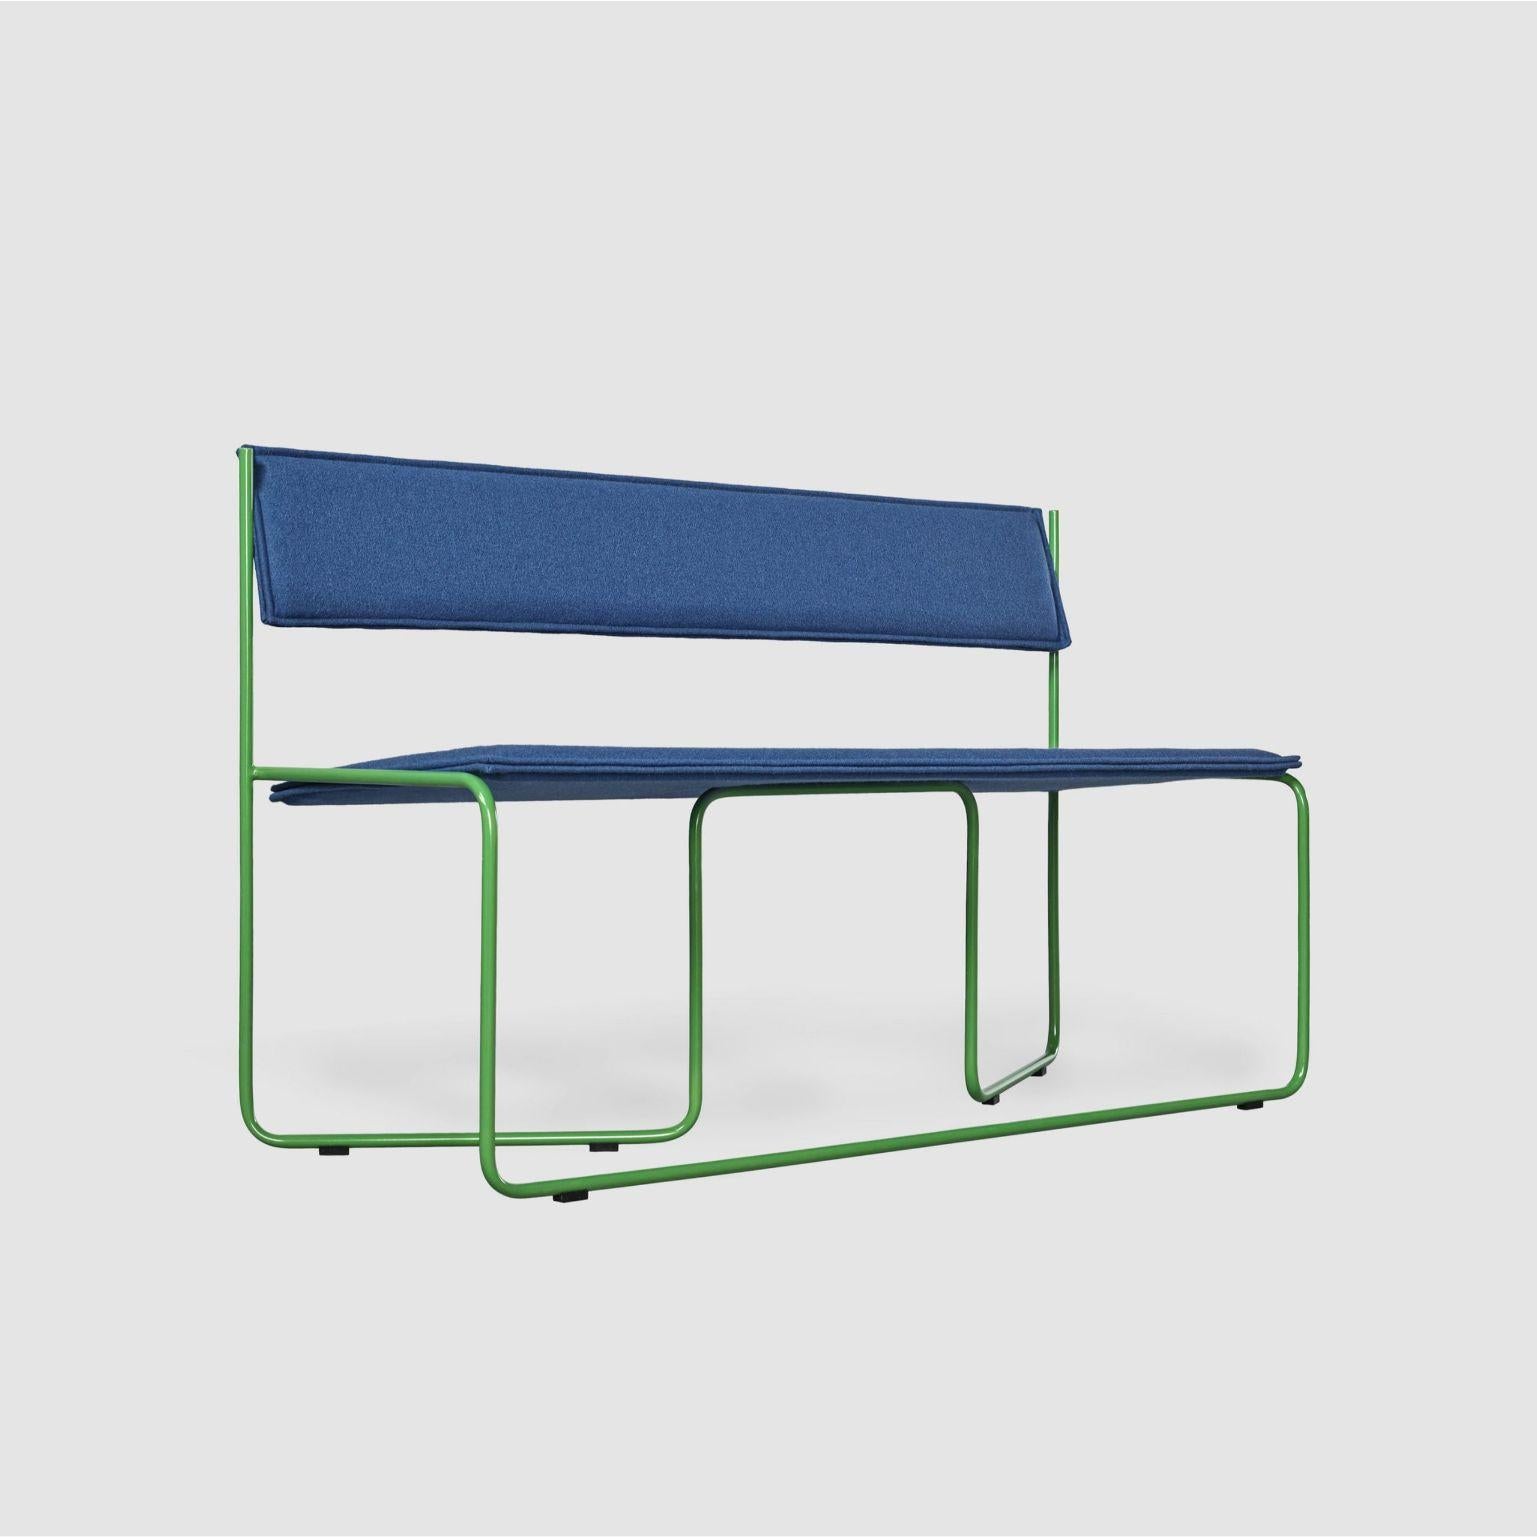 Trampolín Bench, Blue by Pepe Albargues
Dimensions: W135, D49, H83, Seat 44
Materials: Chrome plated or painted iron structure
Foam CMHR (high resilience and flame retardant) for all our cushion filling systems
Removable backrest and seat